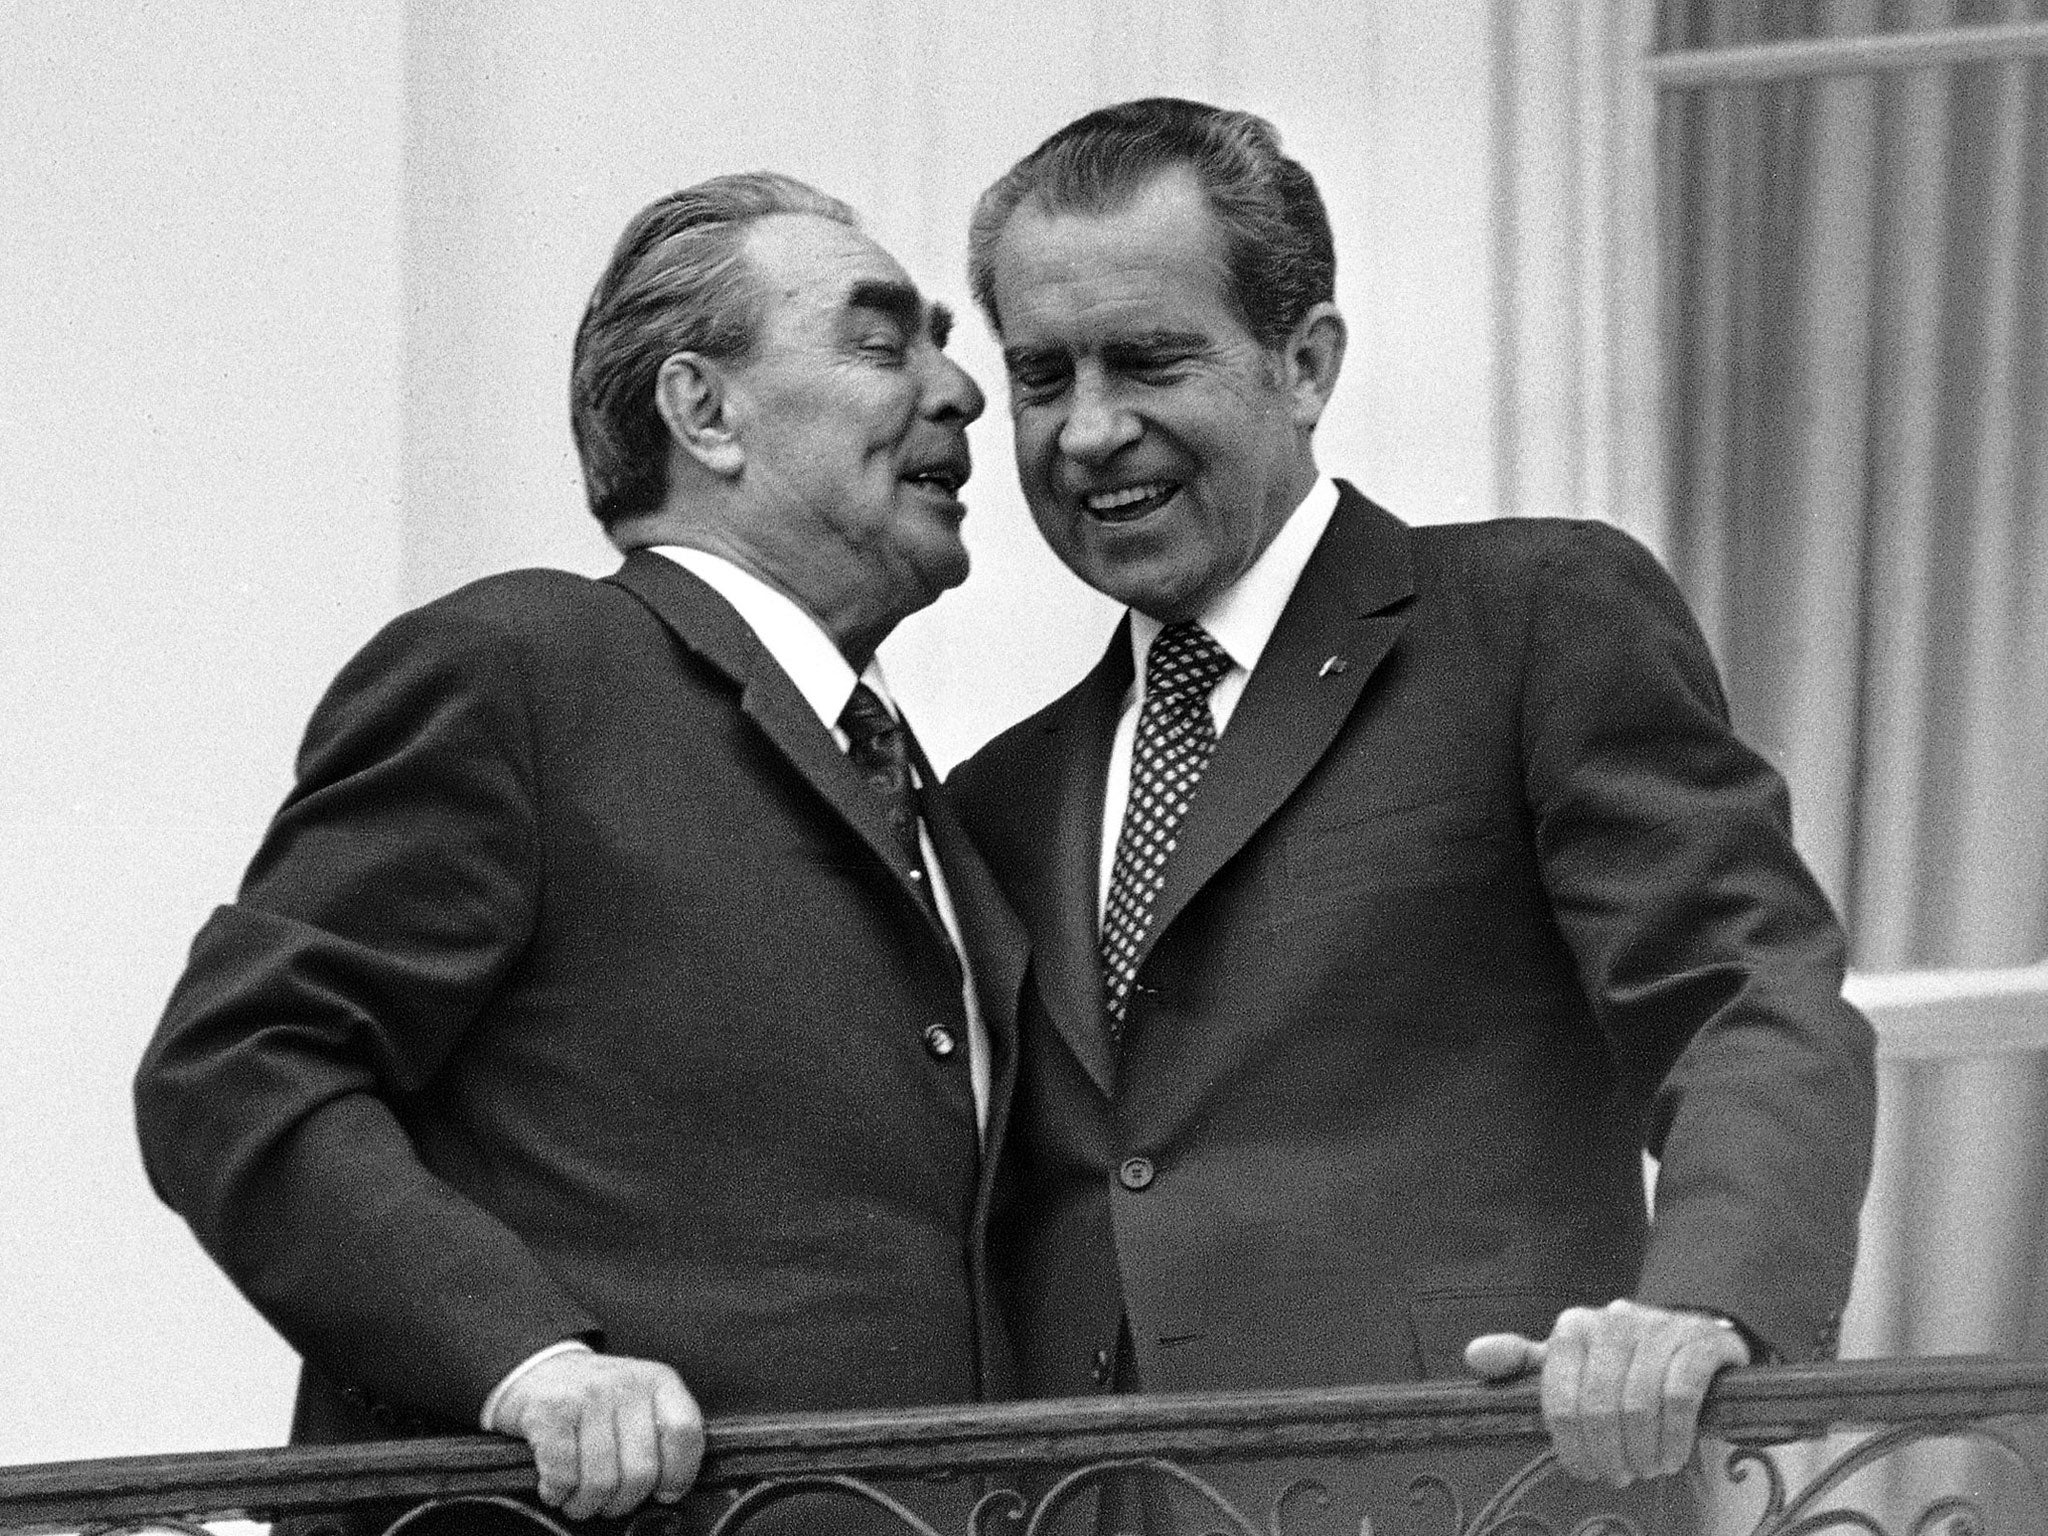 Richard Nixon, right, shares a joke with his Soviet counterpart Leonid Brezhnev, left, during their 1973 summit.